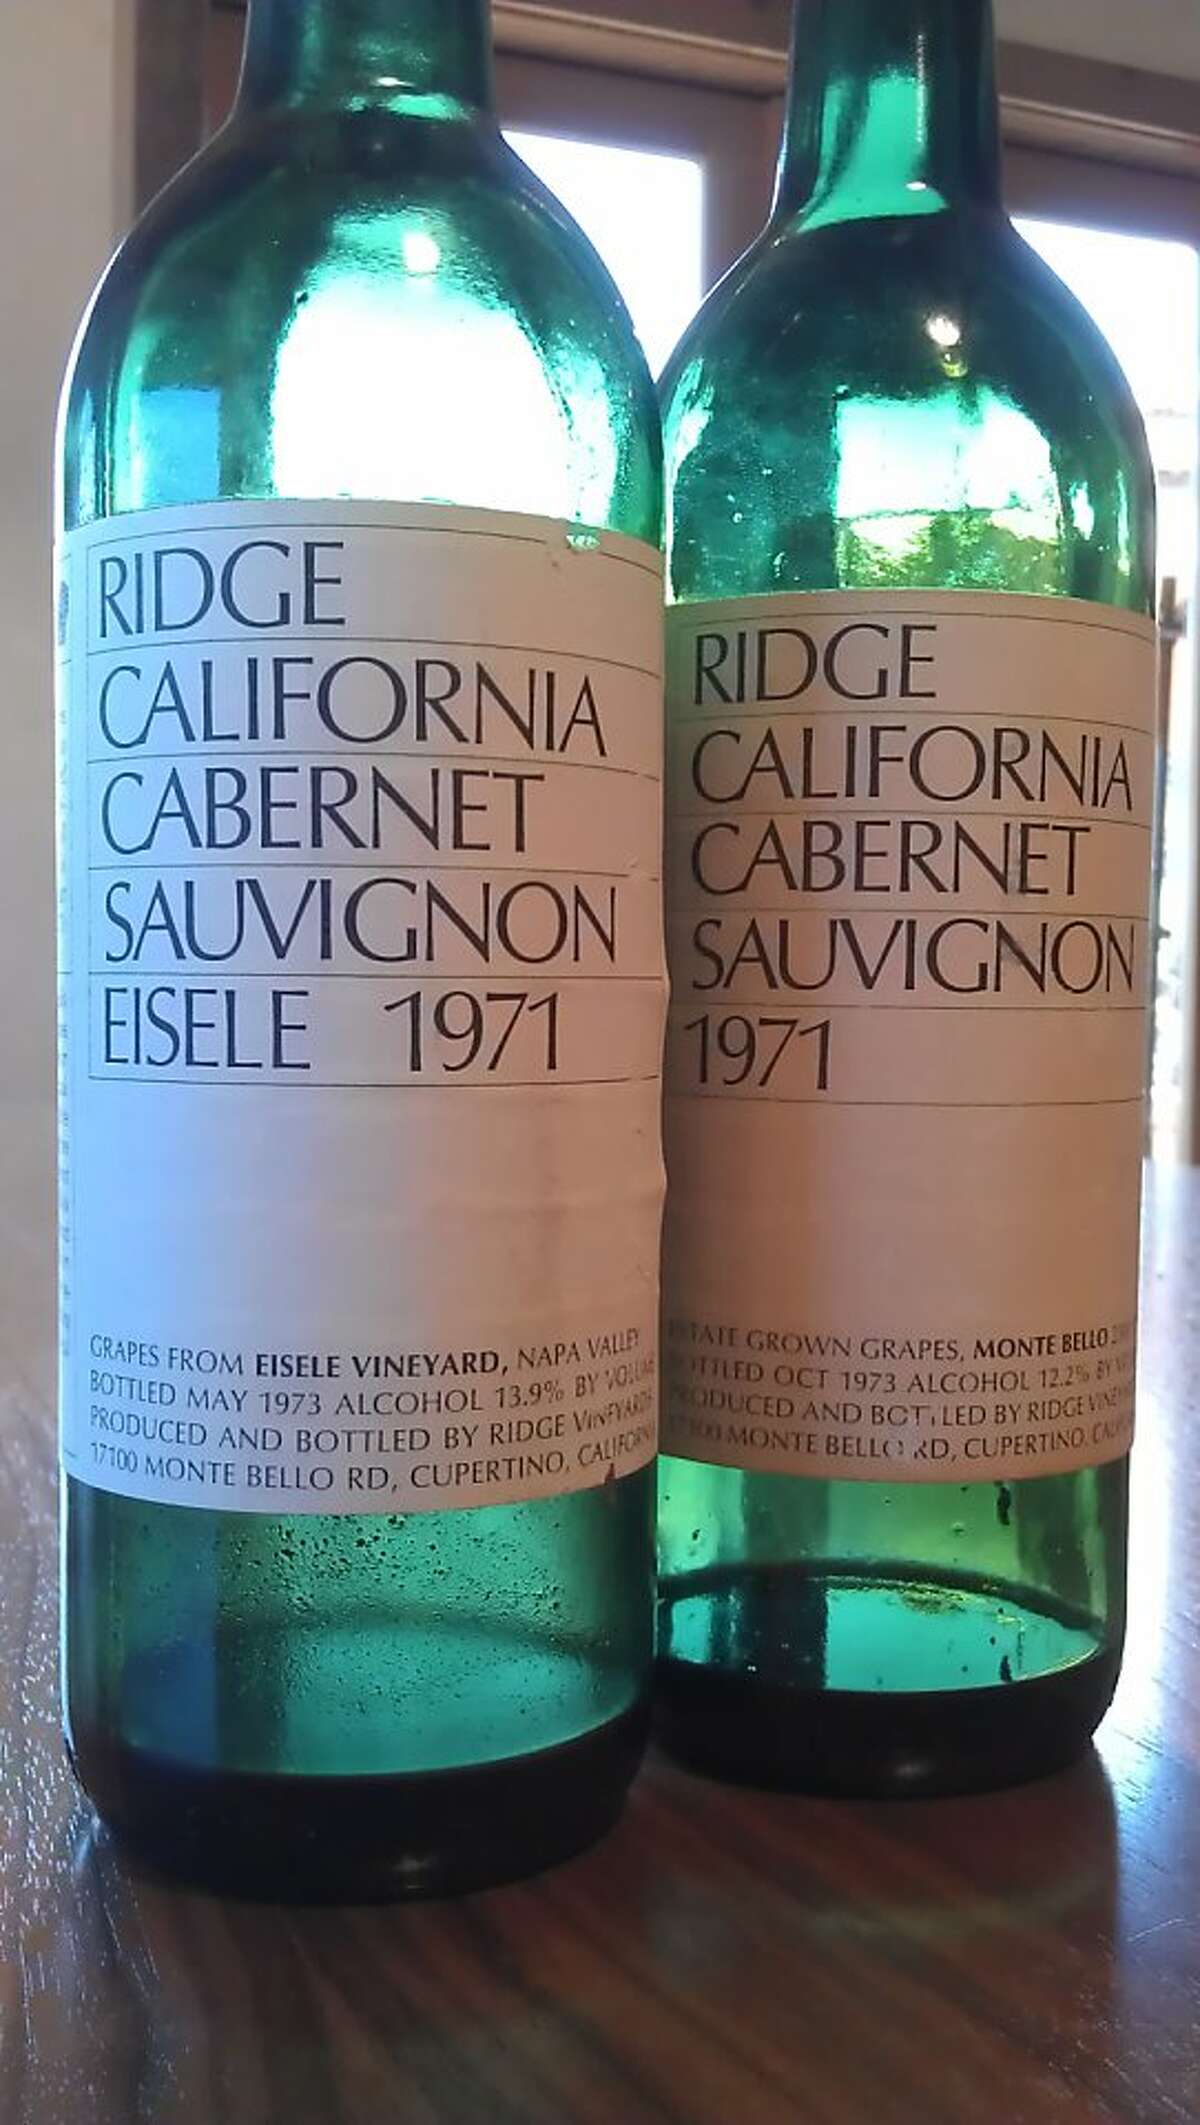 Bottles of the 1971 Ridge Eisele Vineyard Cabernet and the 1971 Ridge Monte Bello, served at Ridge's winery in Cupertino, Calif., Sept. 12, 2012.